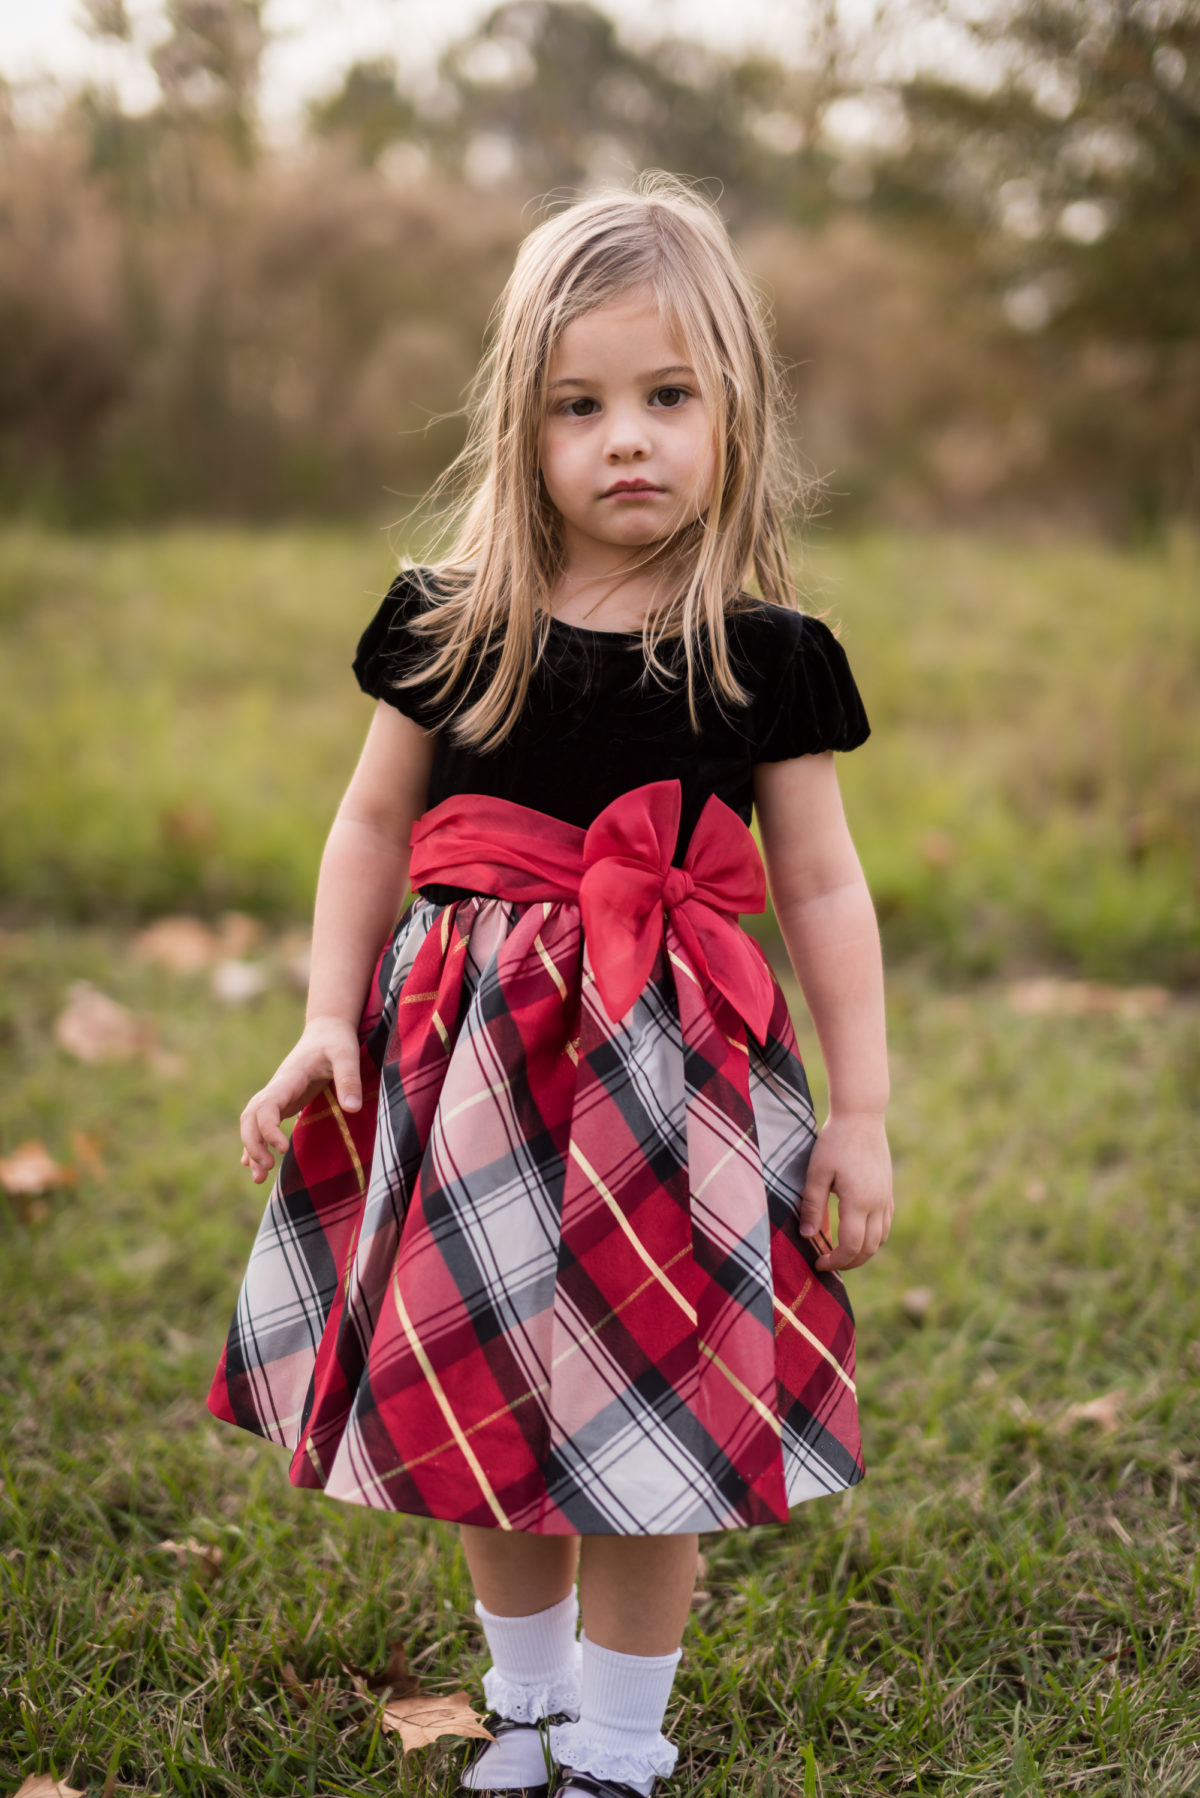 Kids Christmas Pictures 